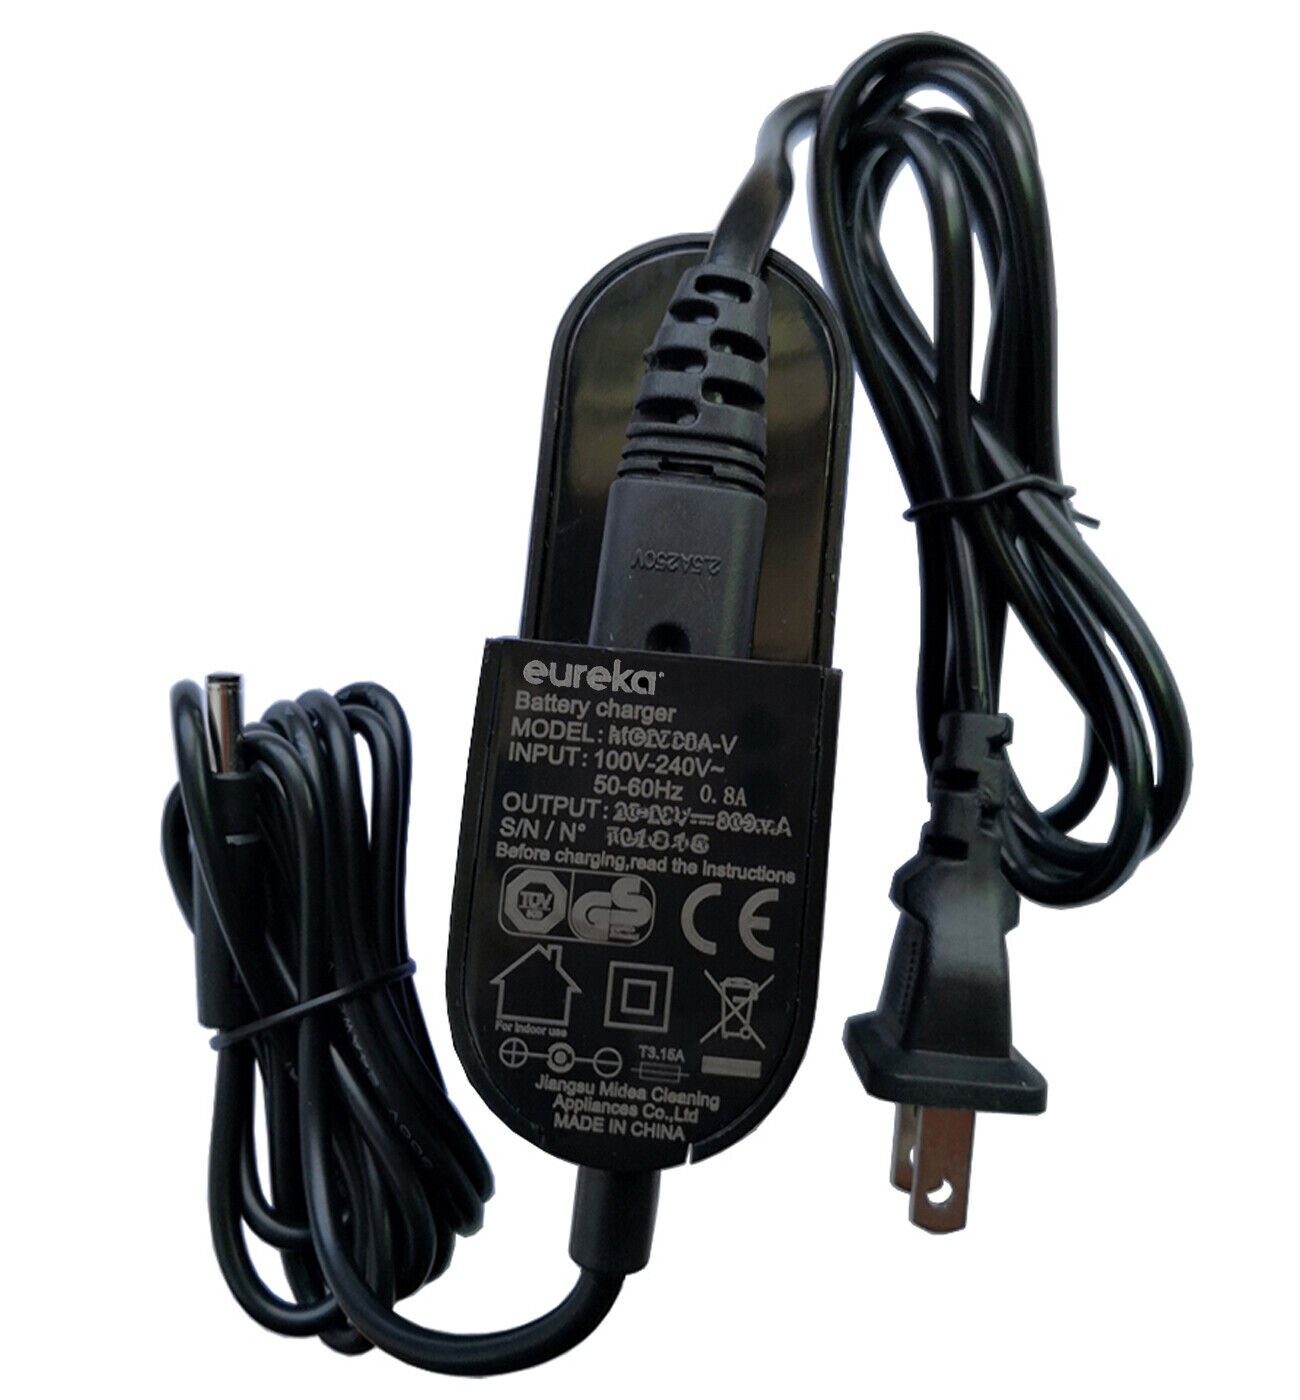 *Brand NEW* Eureka MC2508A Vacuum Cleaner NEC-222 Cord AC Adapter Charger Power Supply